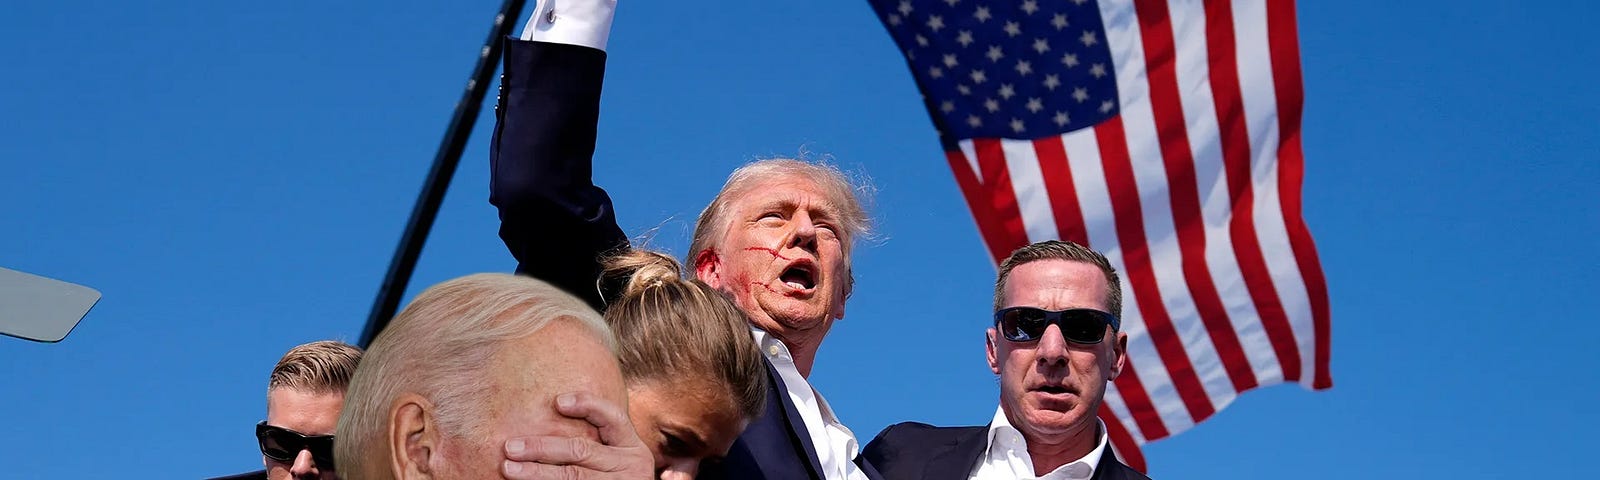 Donald Trump pumping his fist in front of an American flag after being shot. Supermimposed under him is Biden with his hand on his face pointing somewhere.